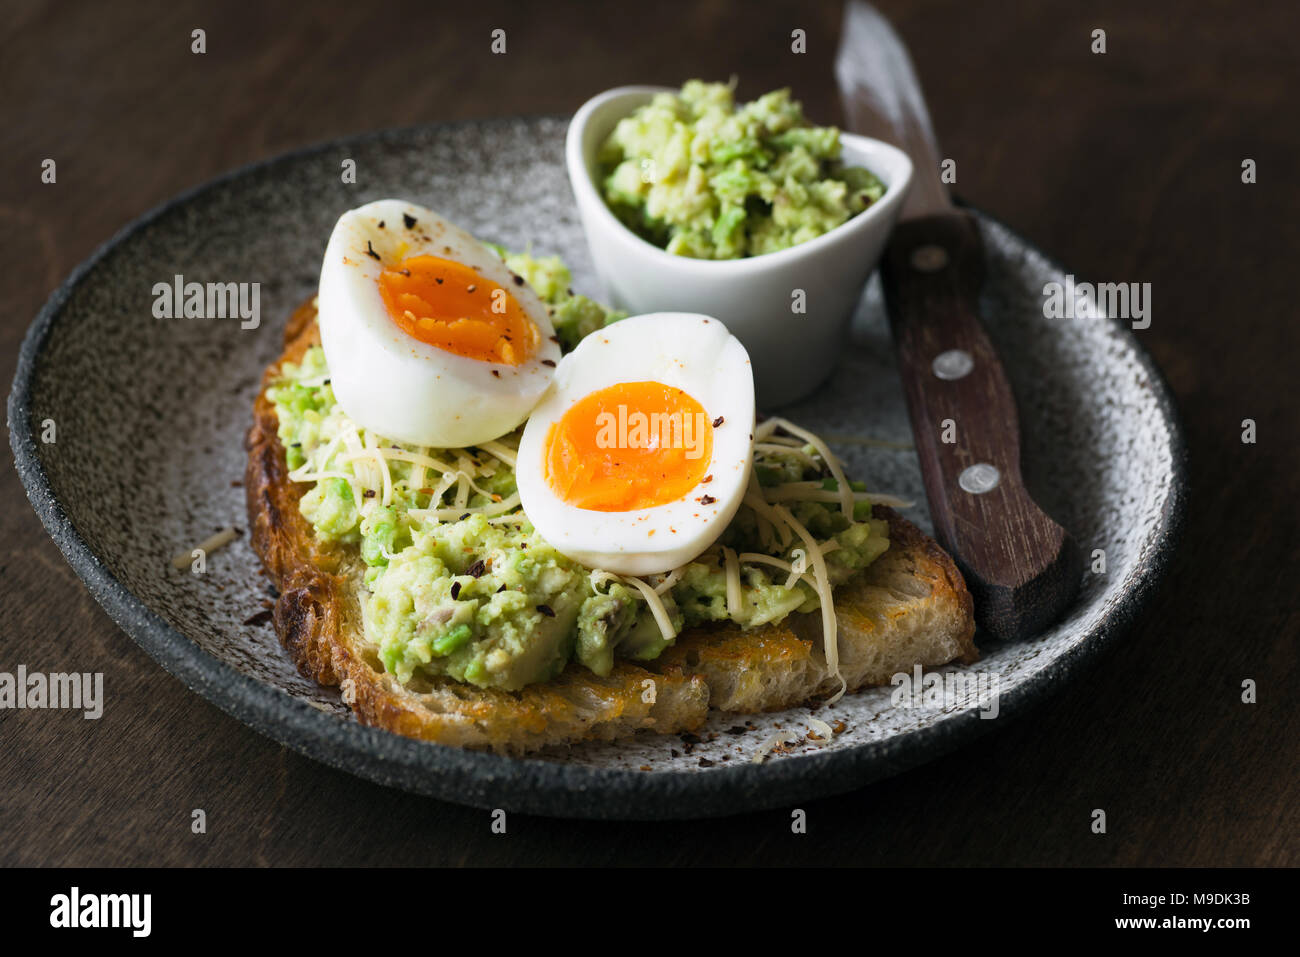 Toast with mashed avocado, egg and cheese on dark background. Closeup view. Healthy eating, healthy snack, lunch or breakfast Stock Photo